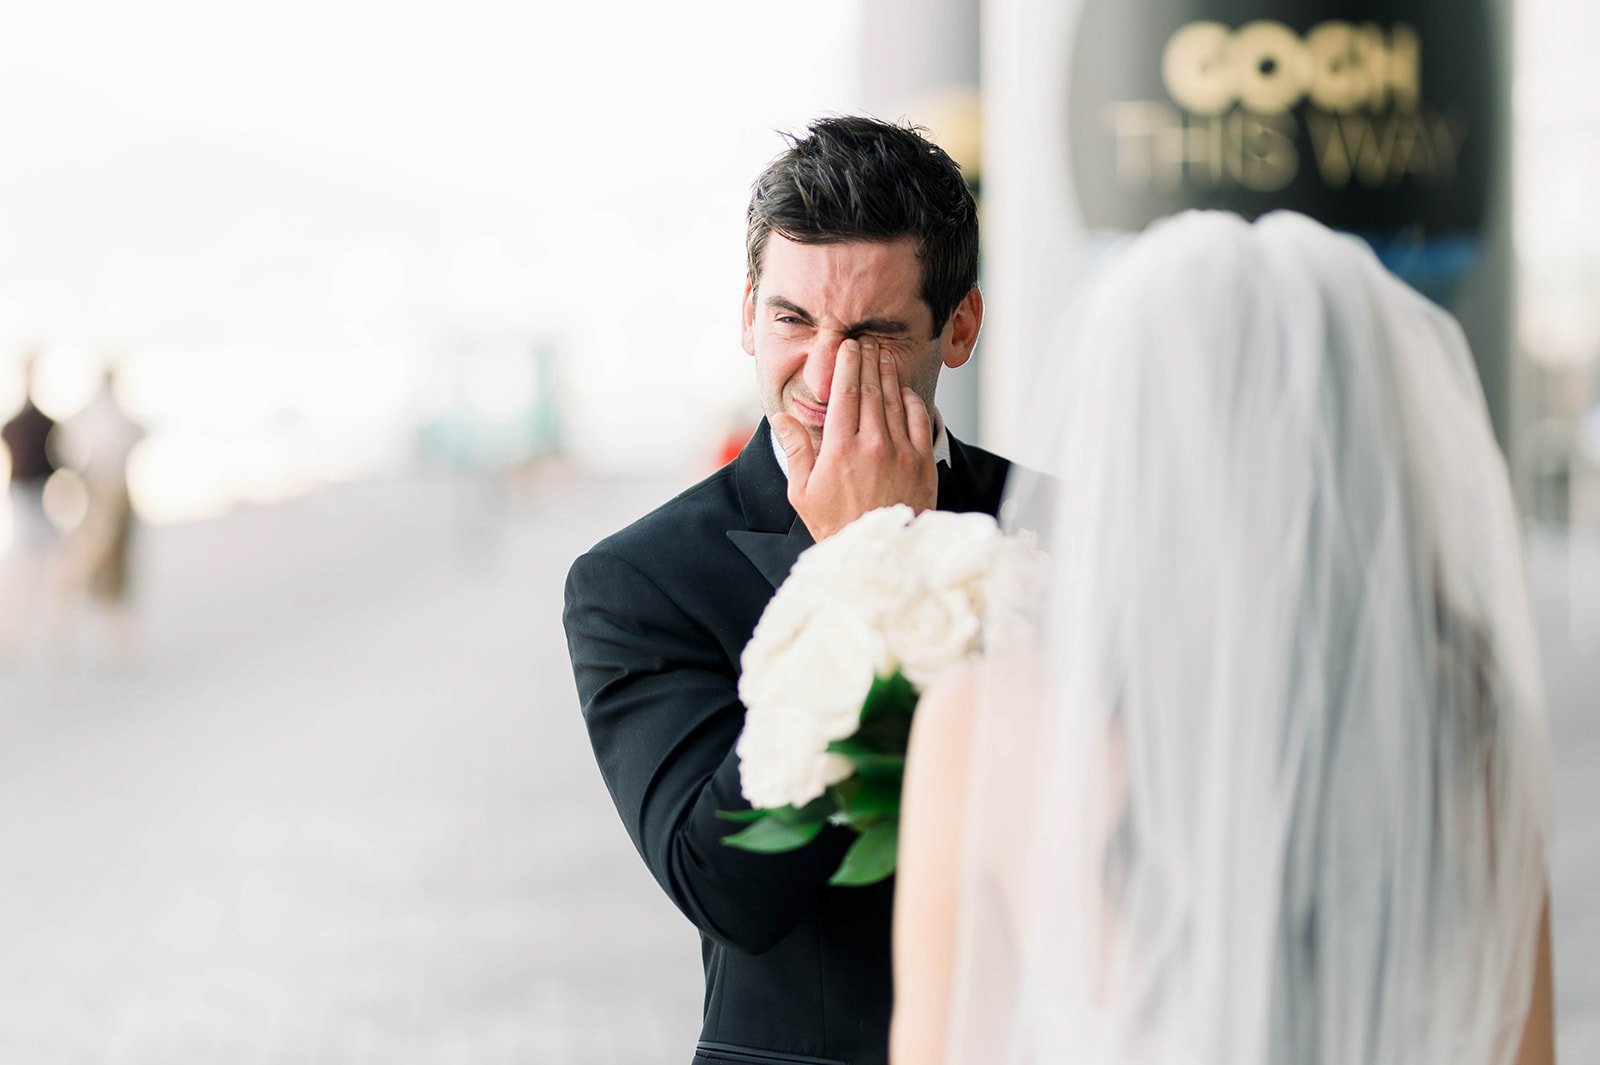 Groom cries after seeing bride, presumably from happiness.  